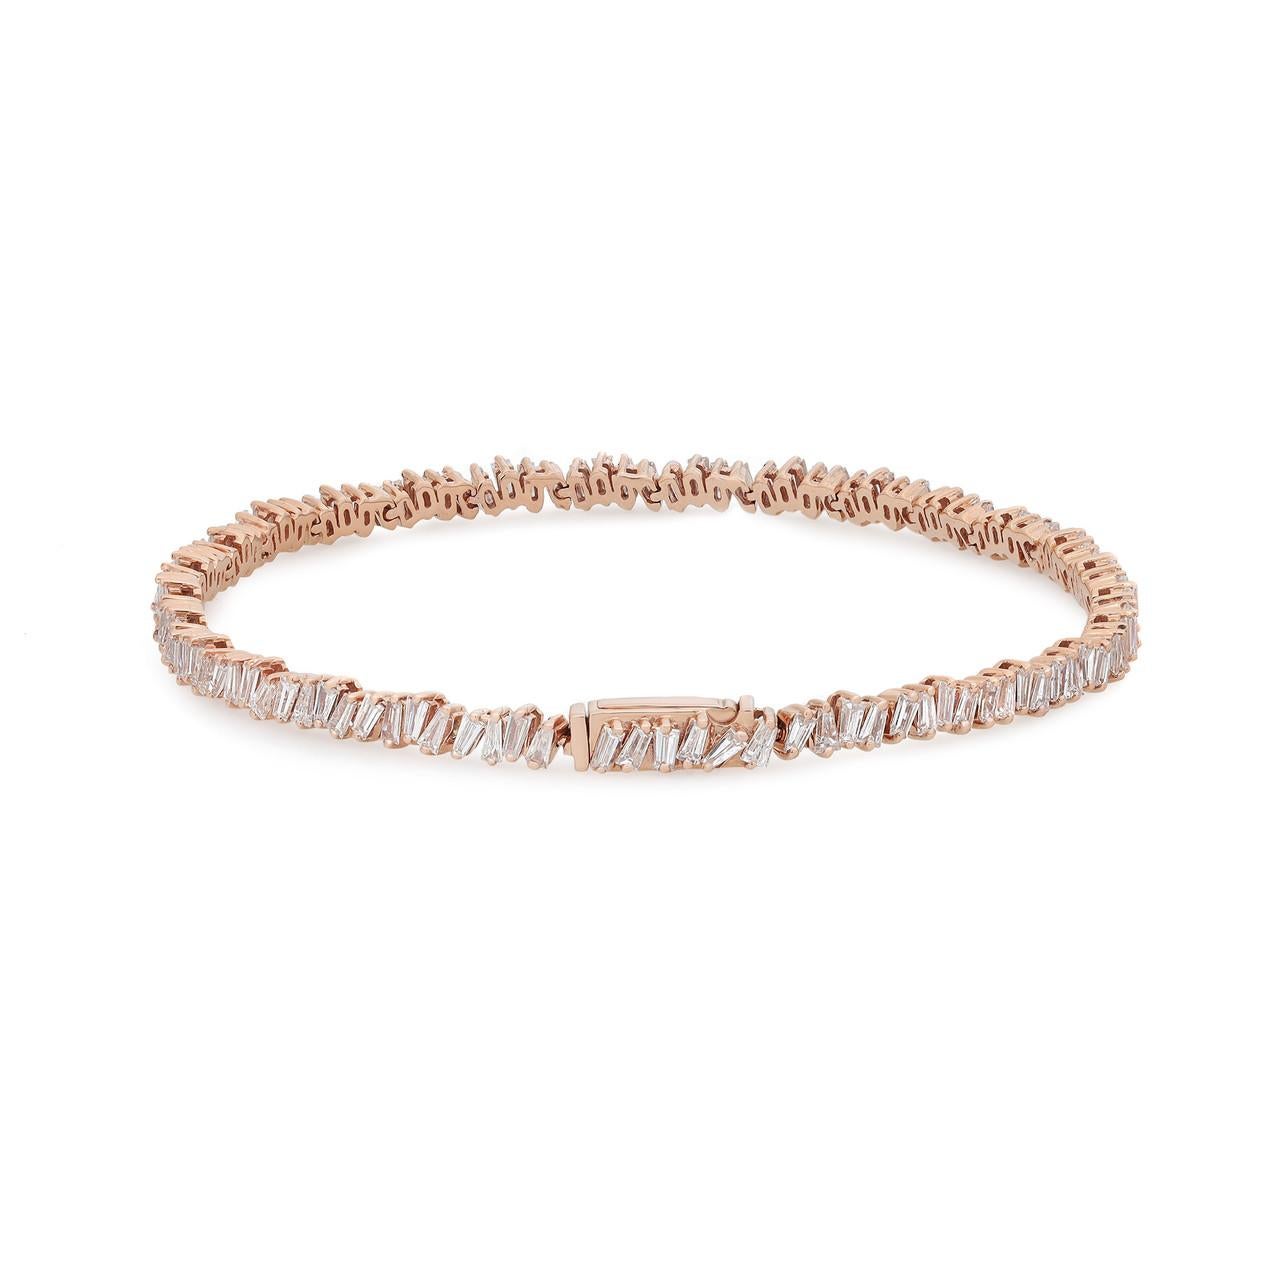 Embrace the exquisite brilliance of the 3.13 Carat Baguette Cut Diamond Tennis Bracelet in 18K Rose Gold, a masterpiece of goldsmithing. This stunning creation showcases the highest level of craftsmanship, resulting in a truly dynamic piece. The